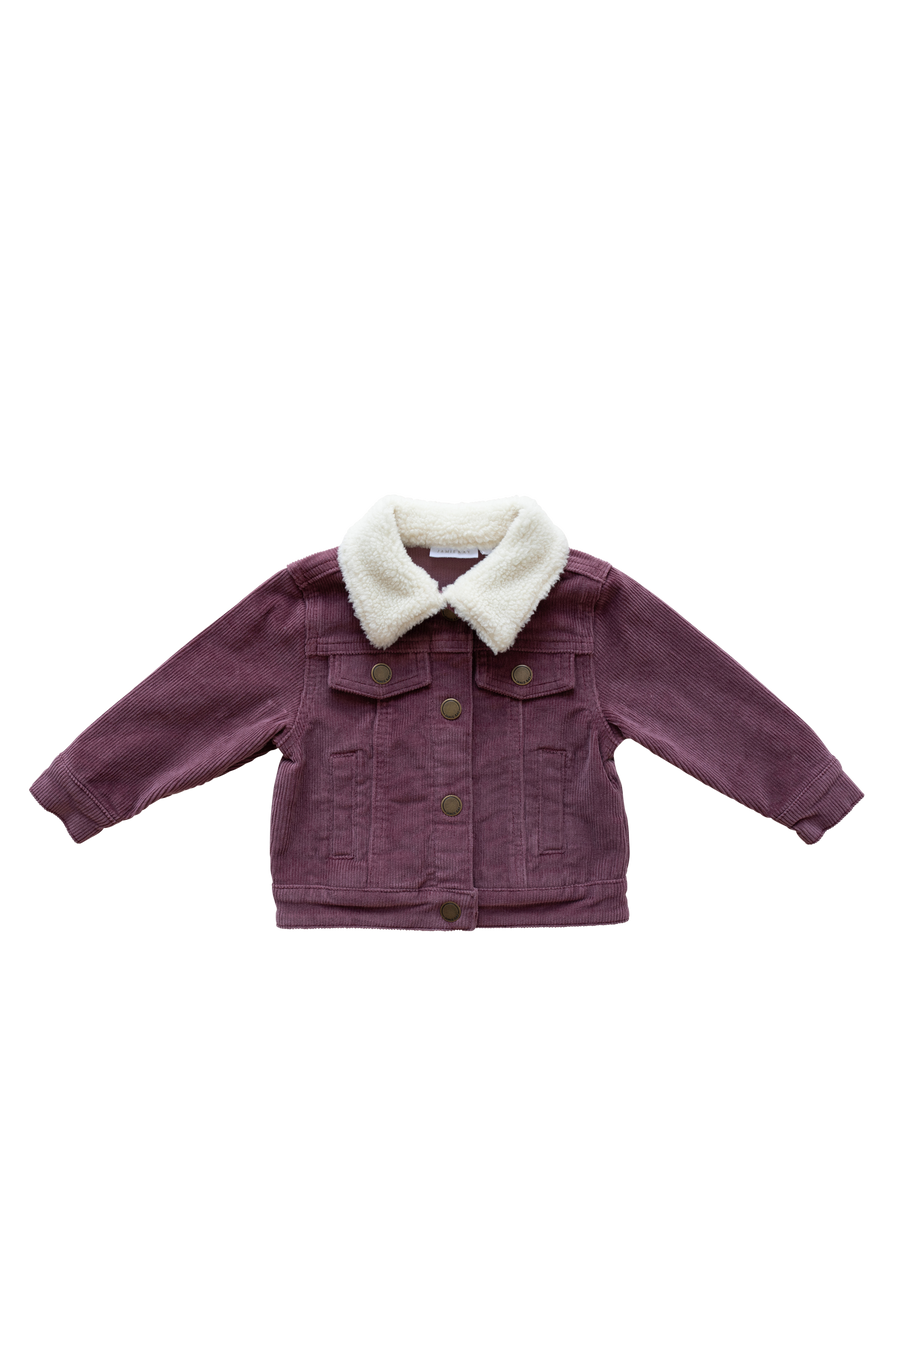 Cord Jacket - Rose Taupe Childrens Jacket from Jamie Kay NZ